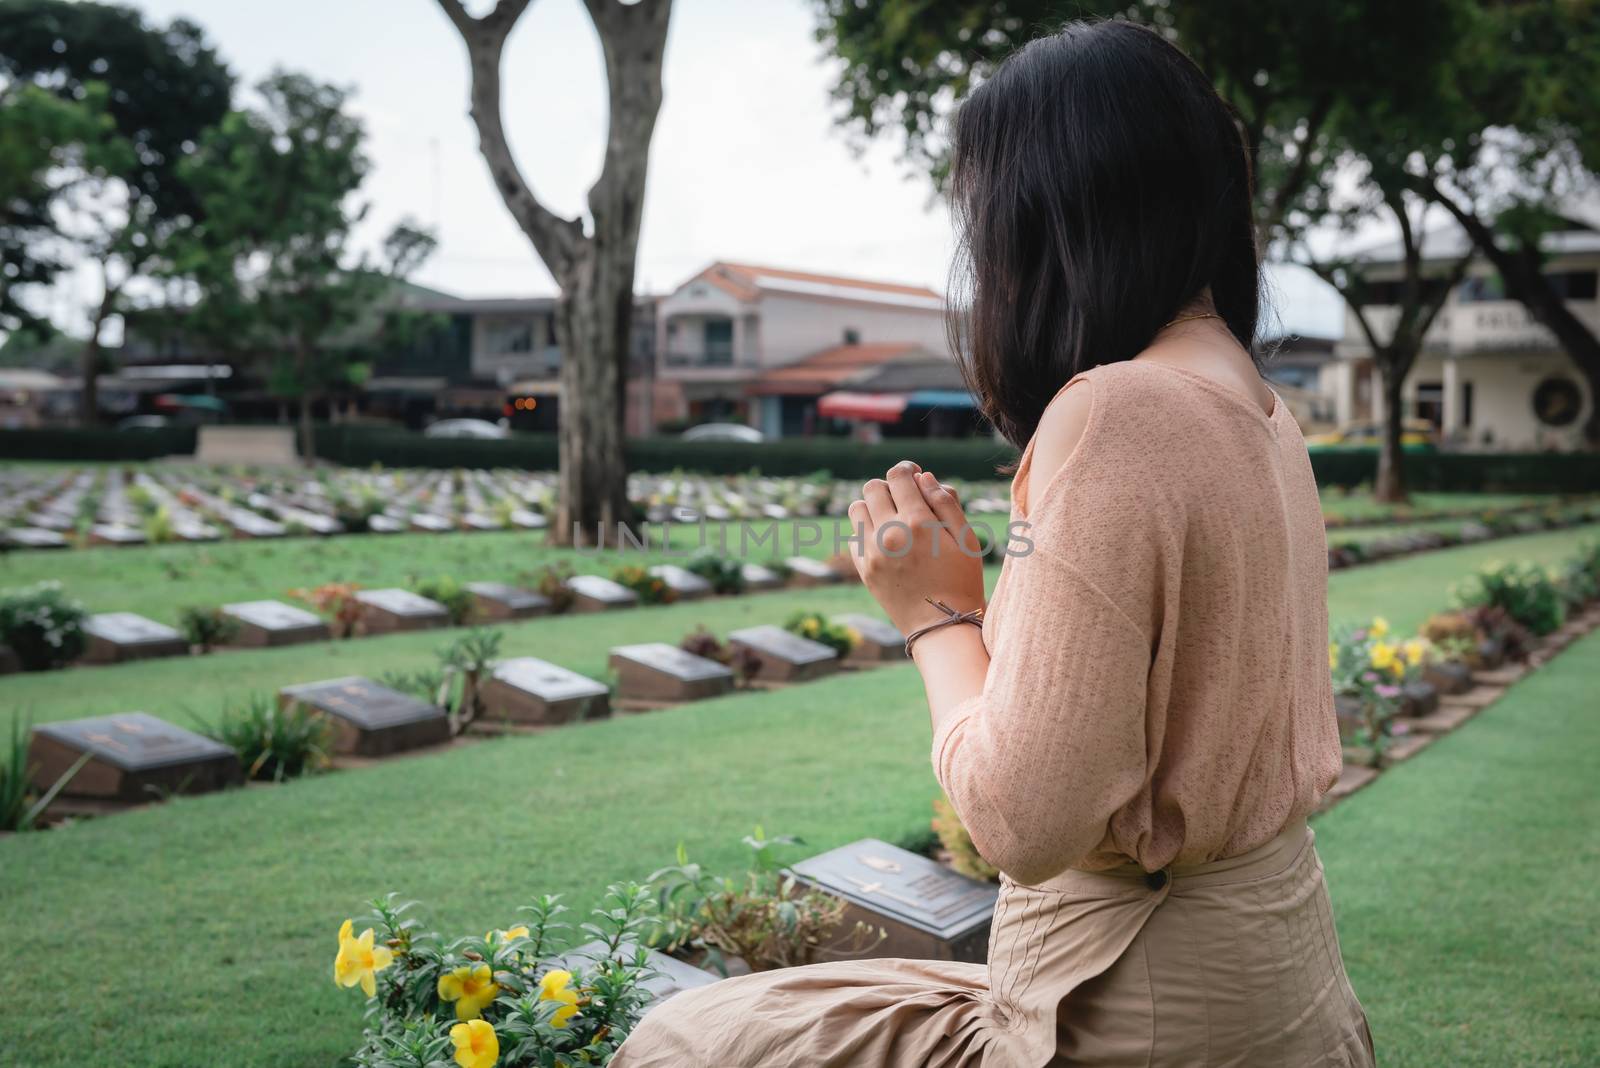 Close-Up of Religious Christian Woman Hands Clasped While Honoring and Praying to Military in War Cemetery. Teenager Woman in Expression Sadness and Pray for Soldier Prisoner of War in Tomb.